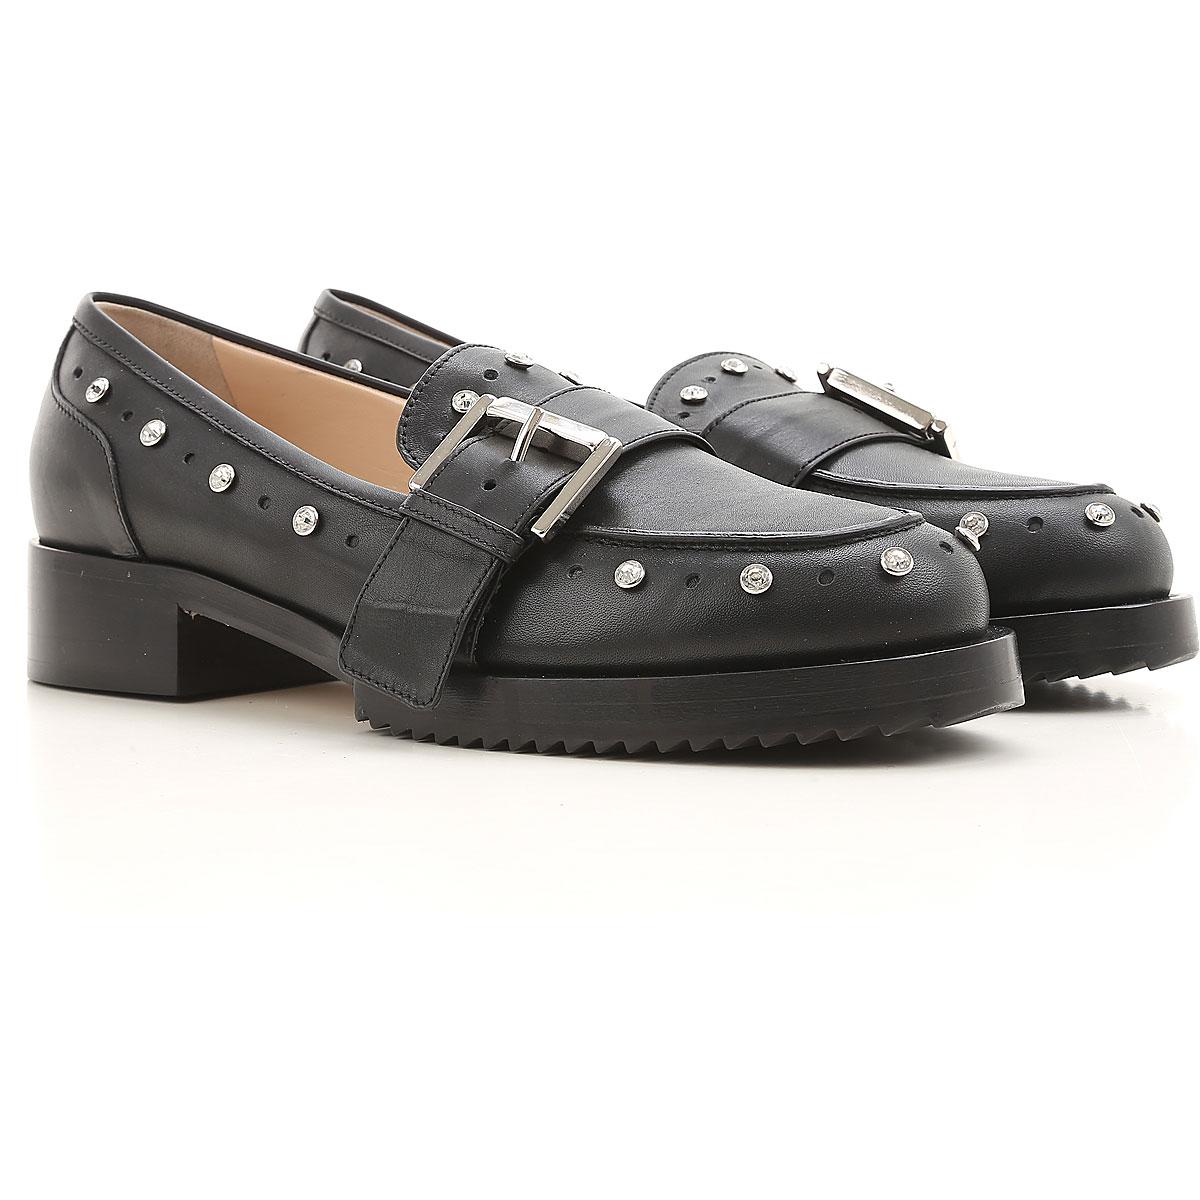 N°21 Leather Loafers For Women On Sale In Outlet in Black - Save 21% - Lyst